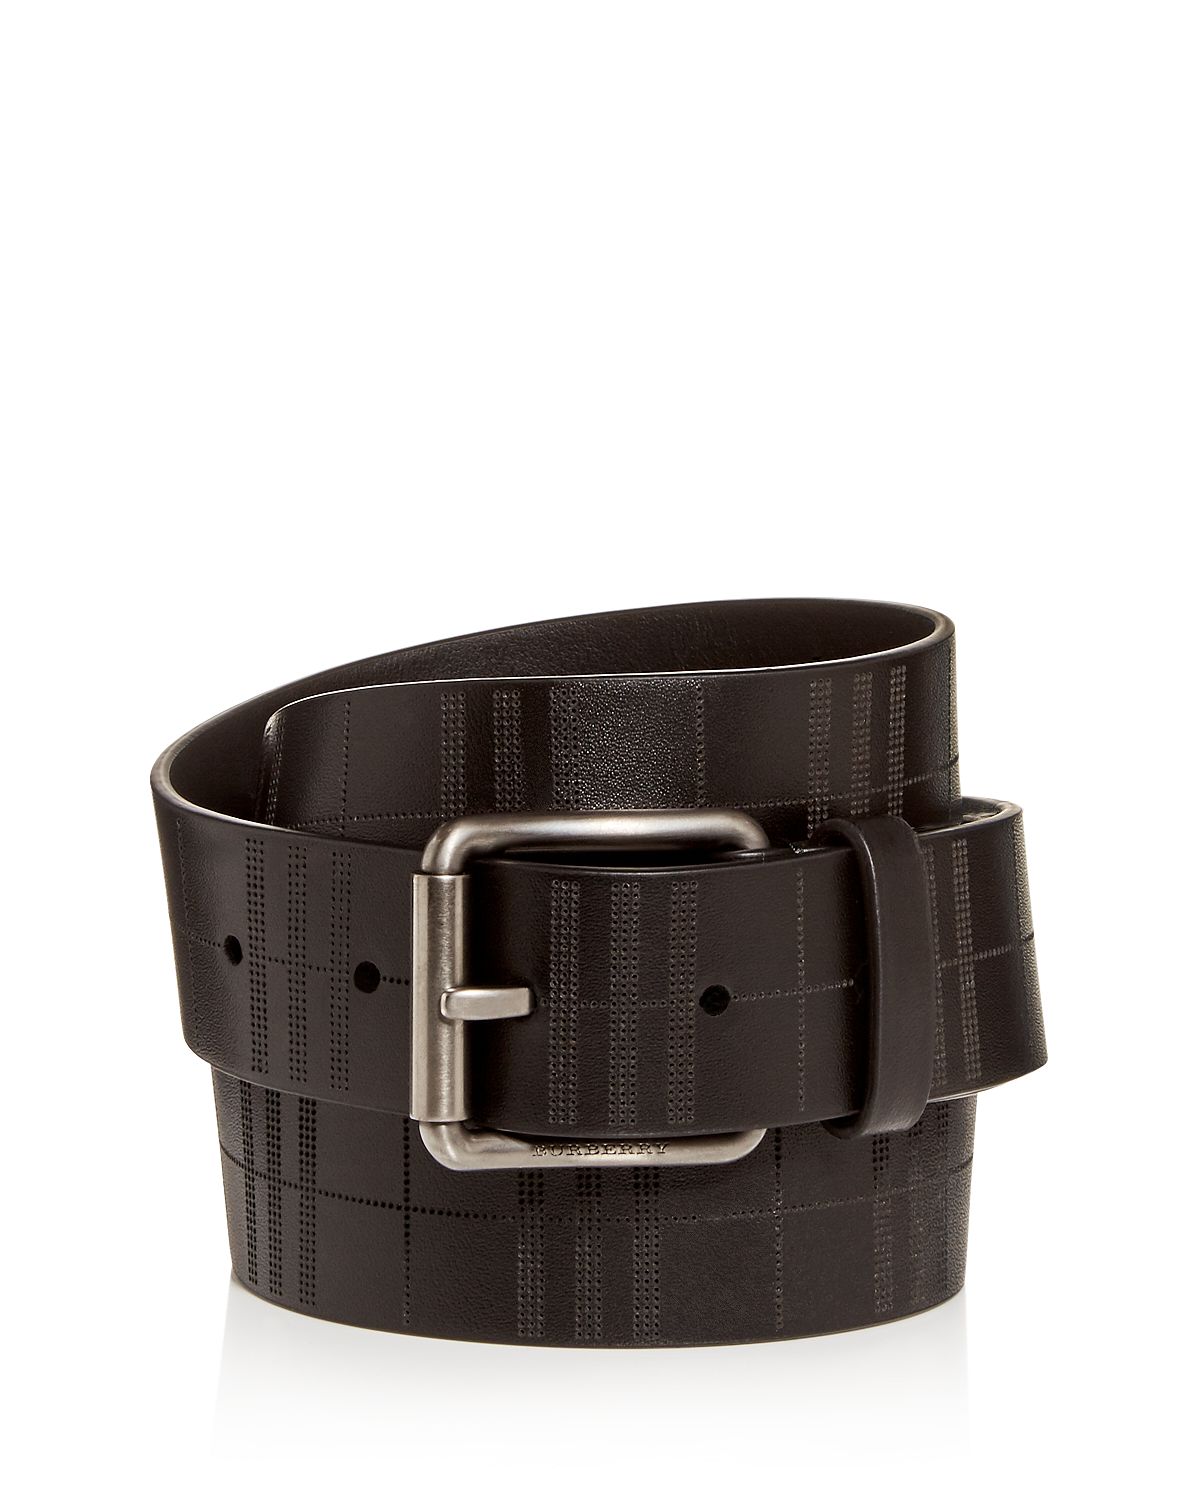 Burberry Perforated Check Leather Belt Black